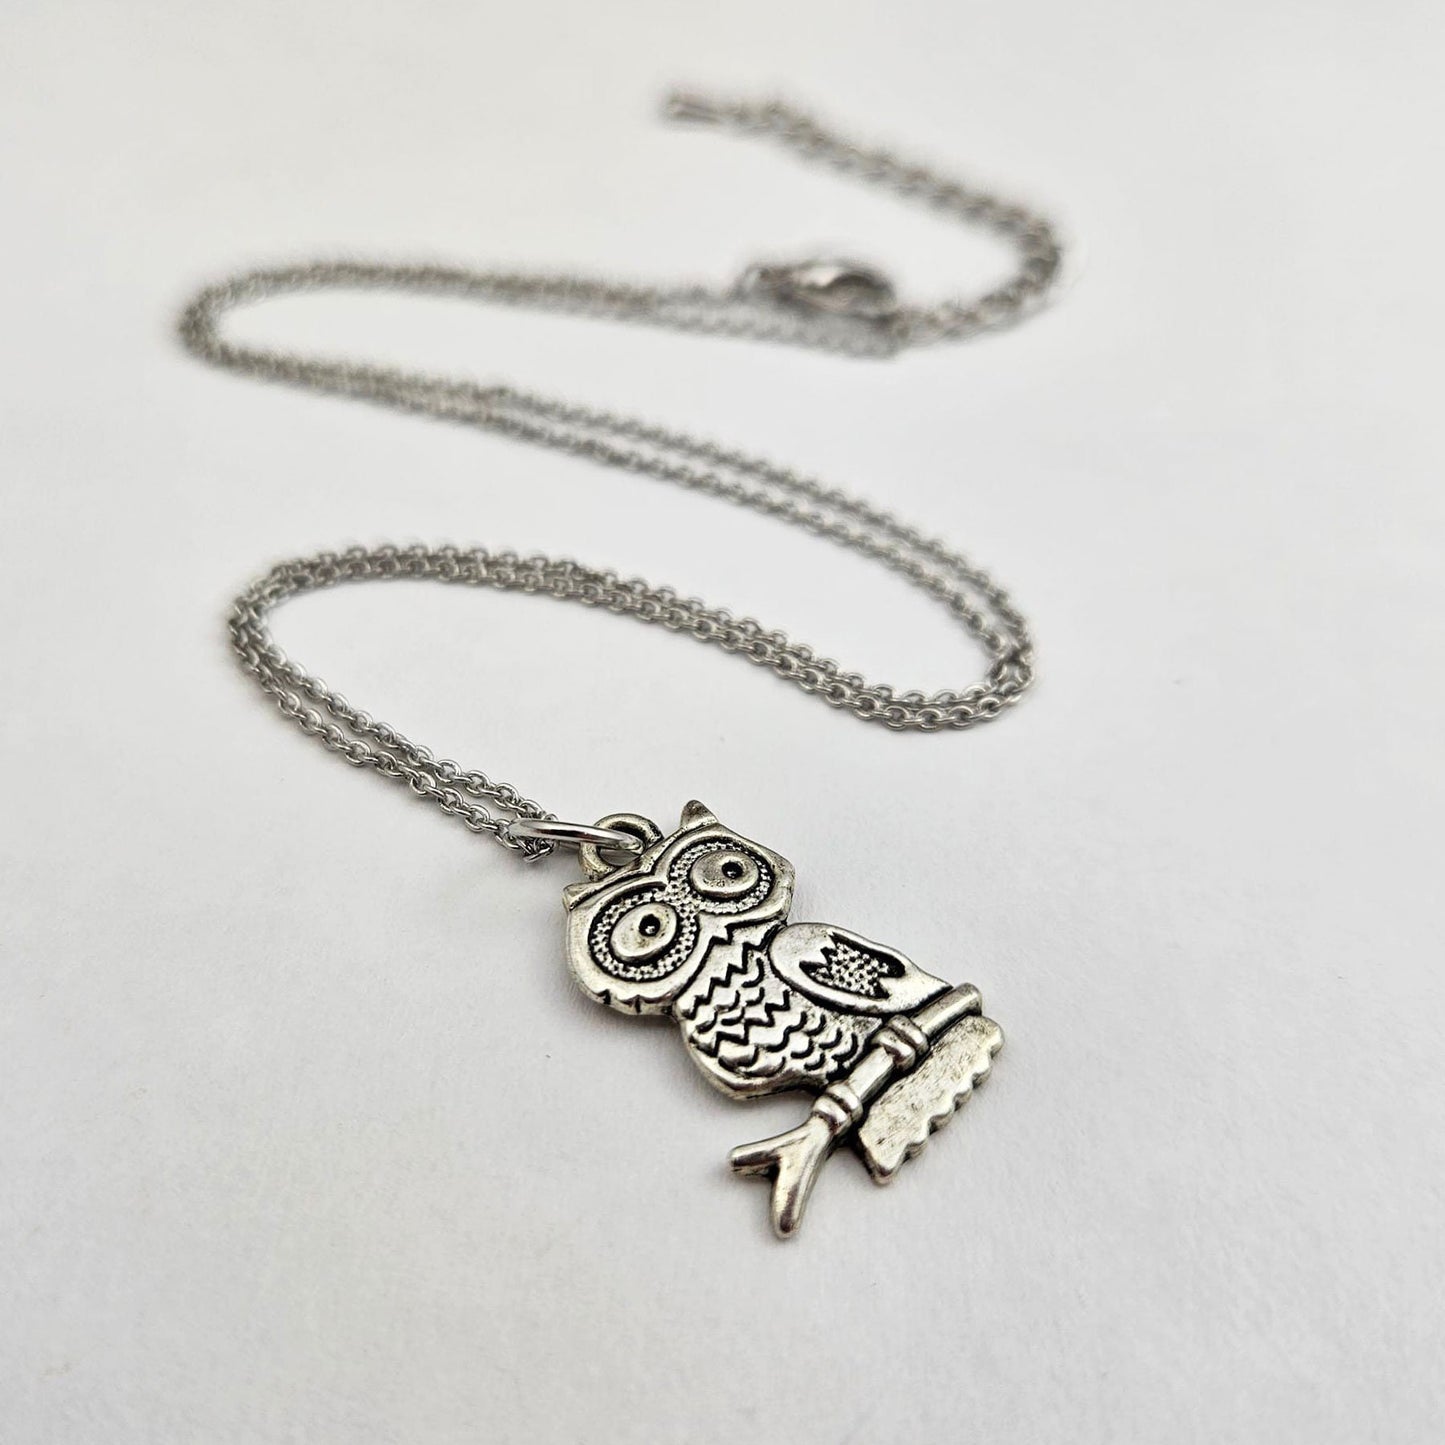 Silver Owl Charm Necklace, Everyday Minimalist Jewelry for Women, Tween Teen Girl Gift